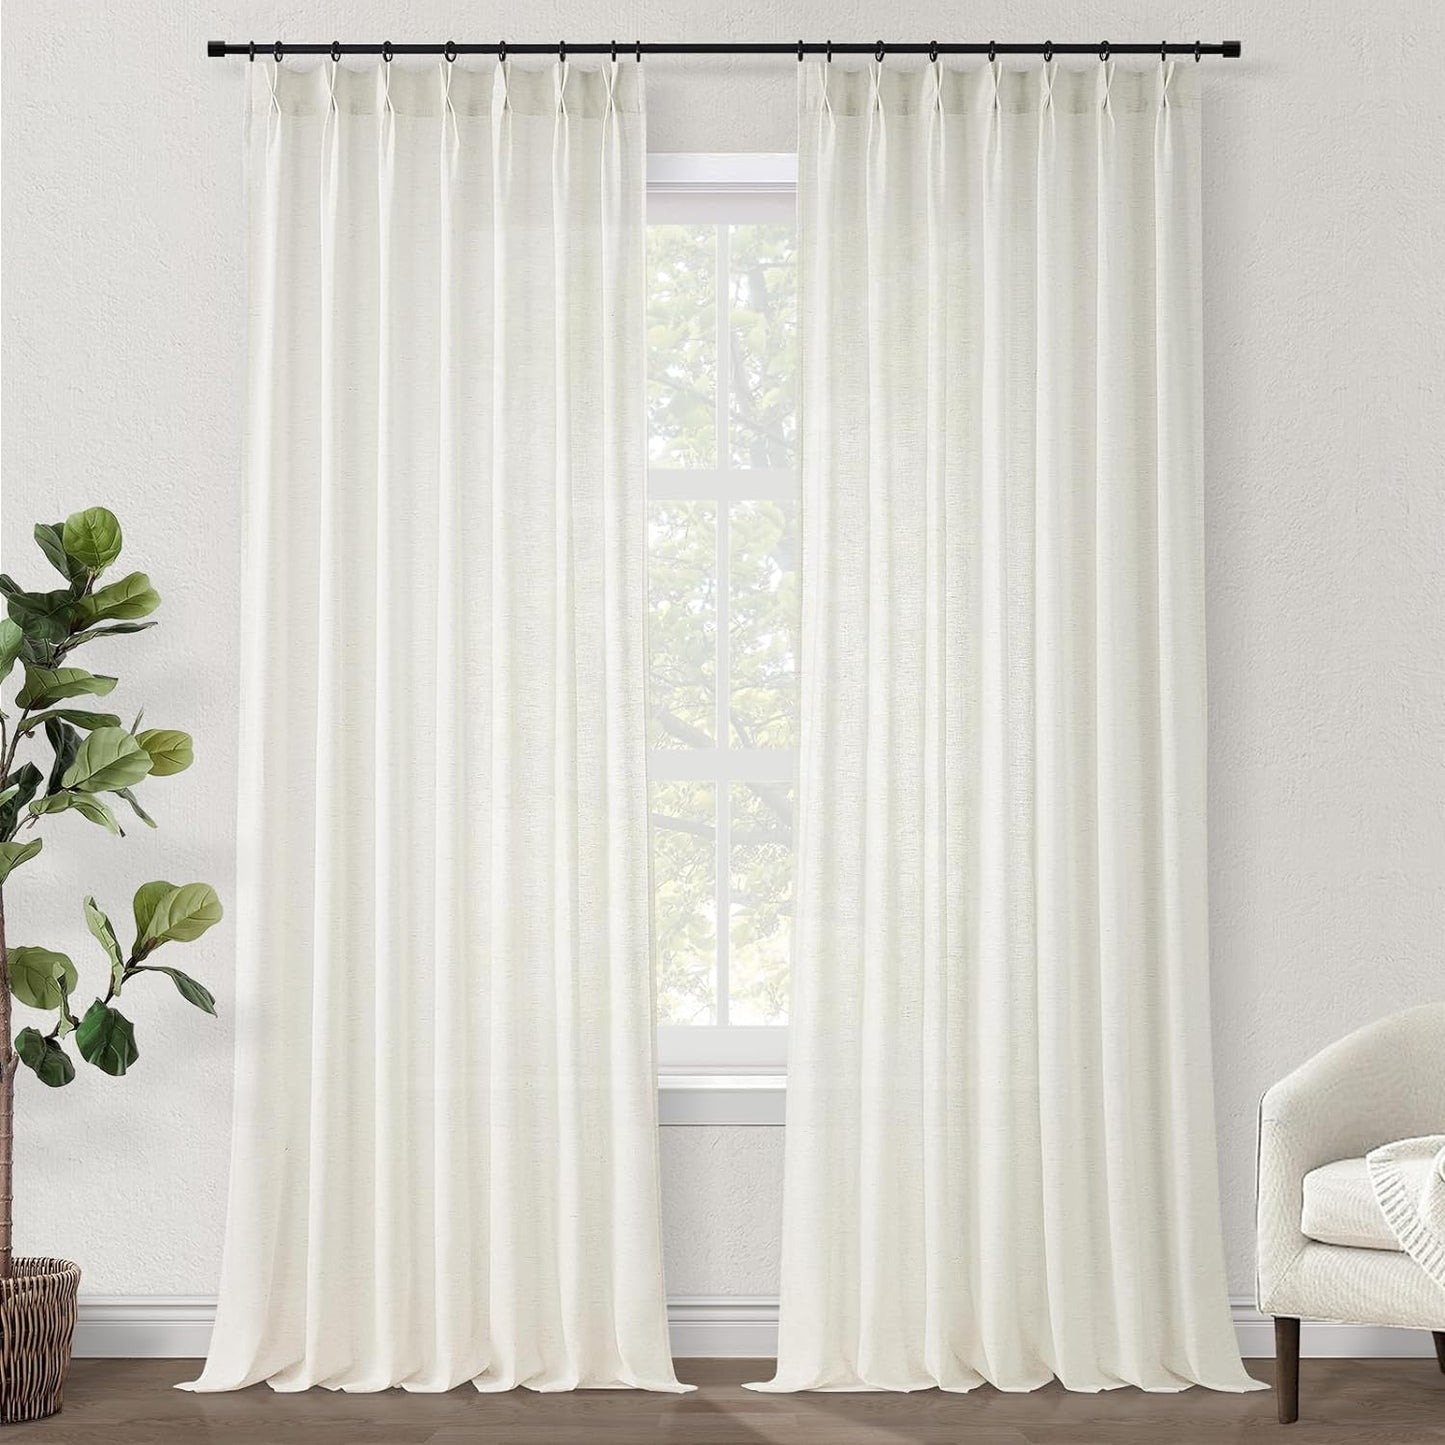 Olive Green Linen Curtains 84 Inches Long for Living Room,Pinch Pleated Drape with Hooks Back Tab Light Filtering Boho Spring Home Decor, Forest/Hunter Green Sheer Curtains 84 Inch Length for Bedroom  Topfine Natural 40" X 72" 